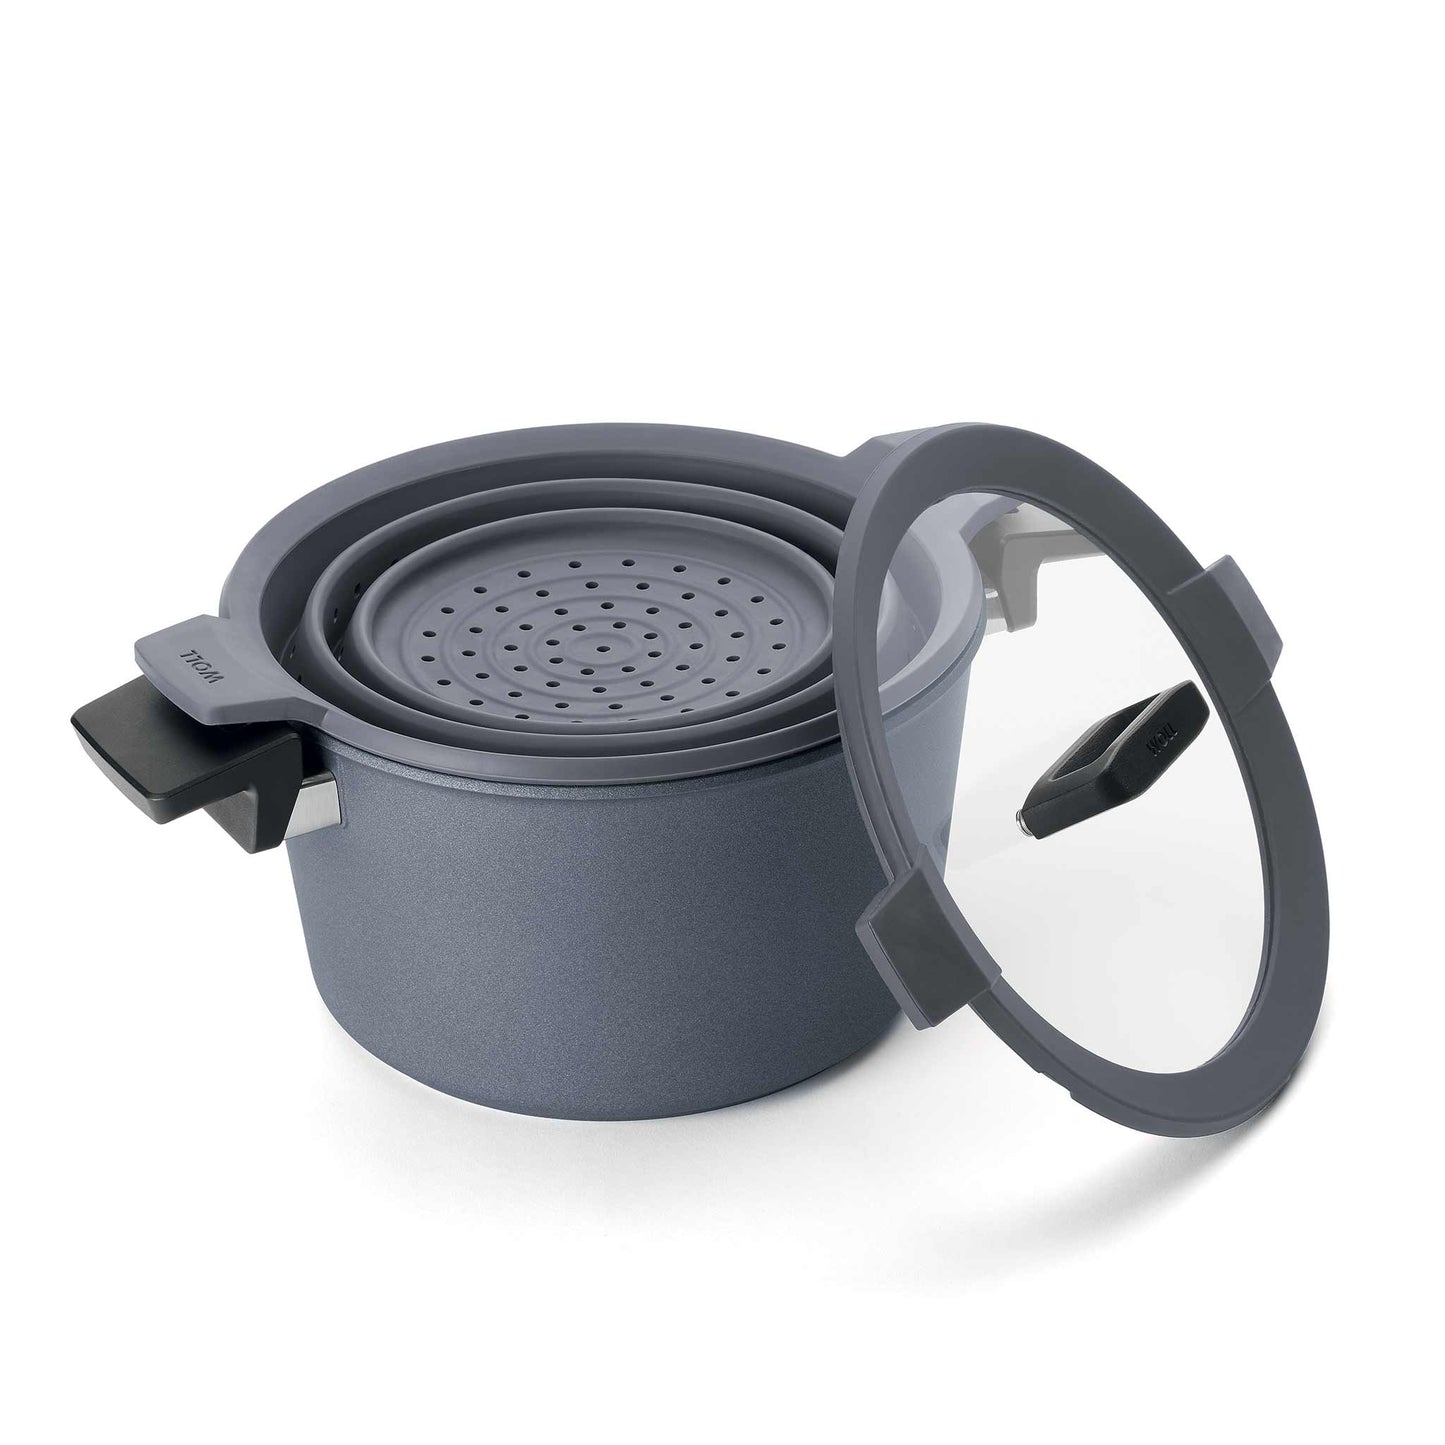 Woll Concept Plus Pots With Steamer Insert